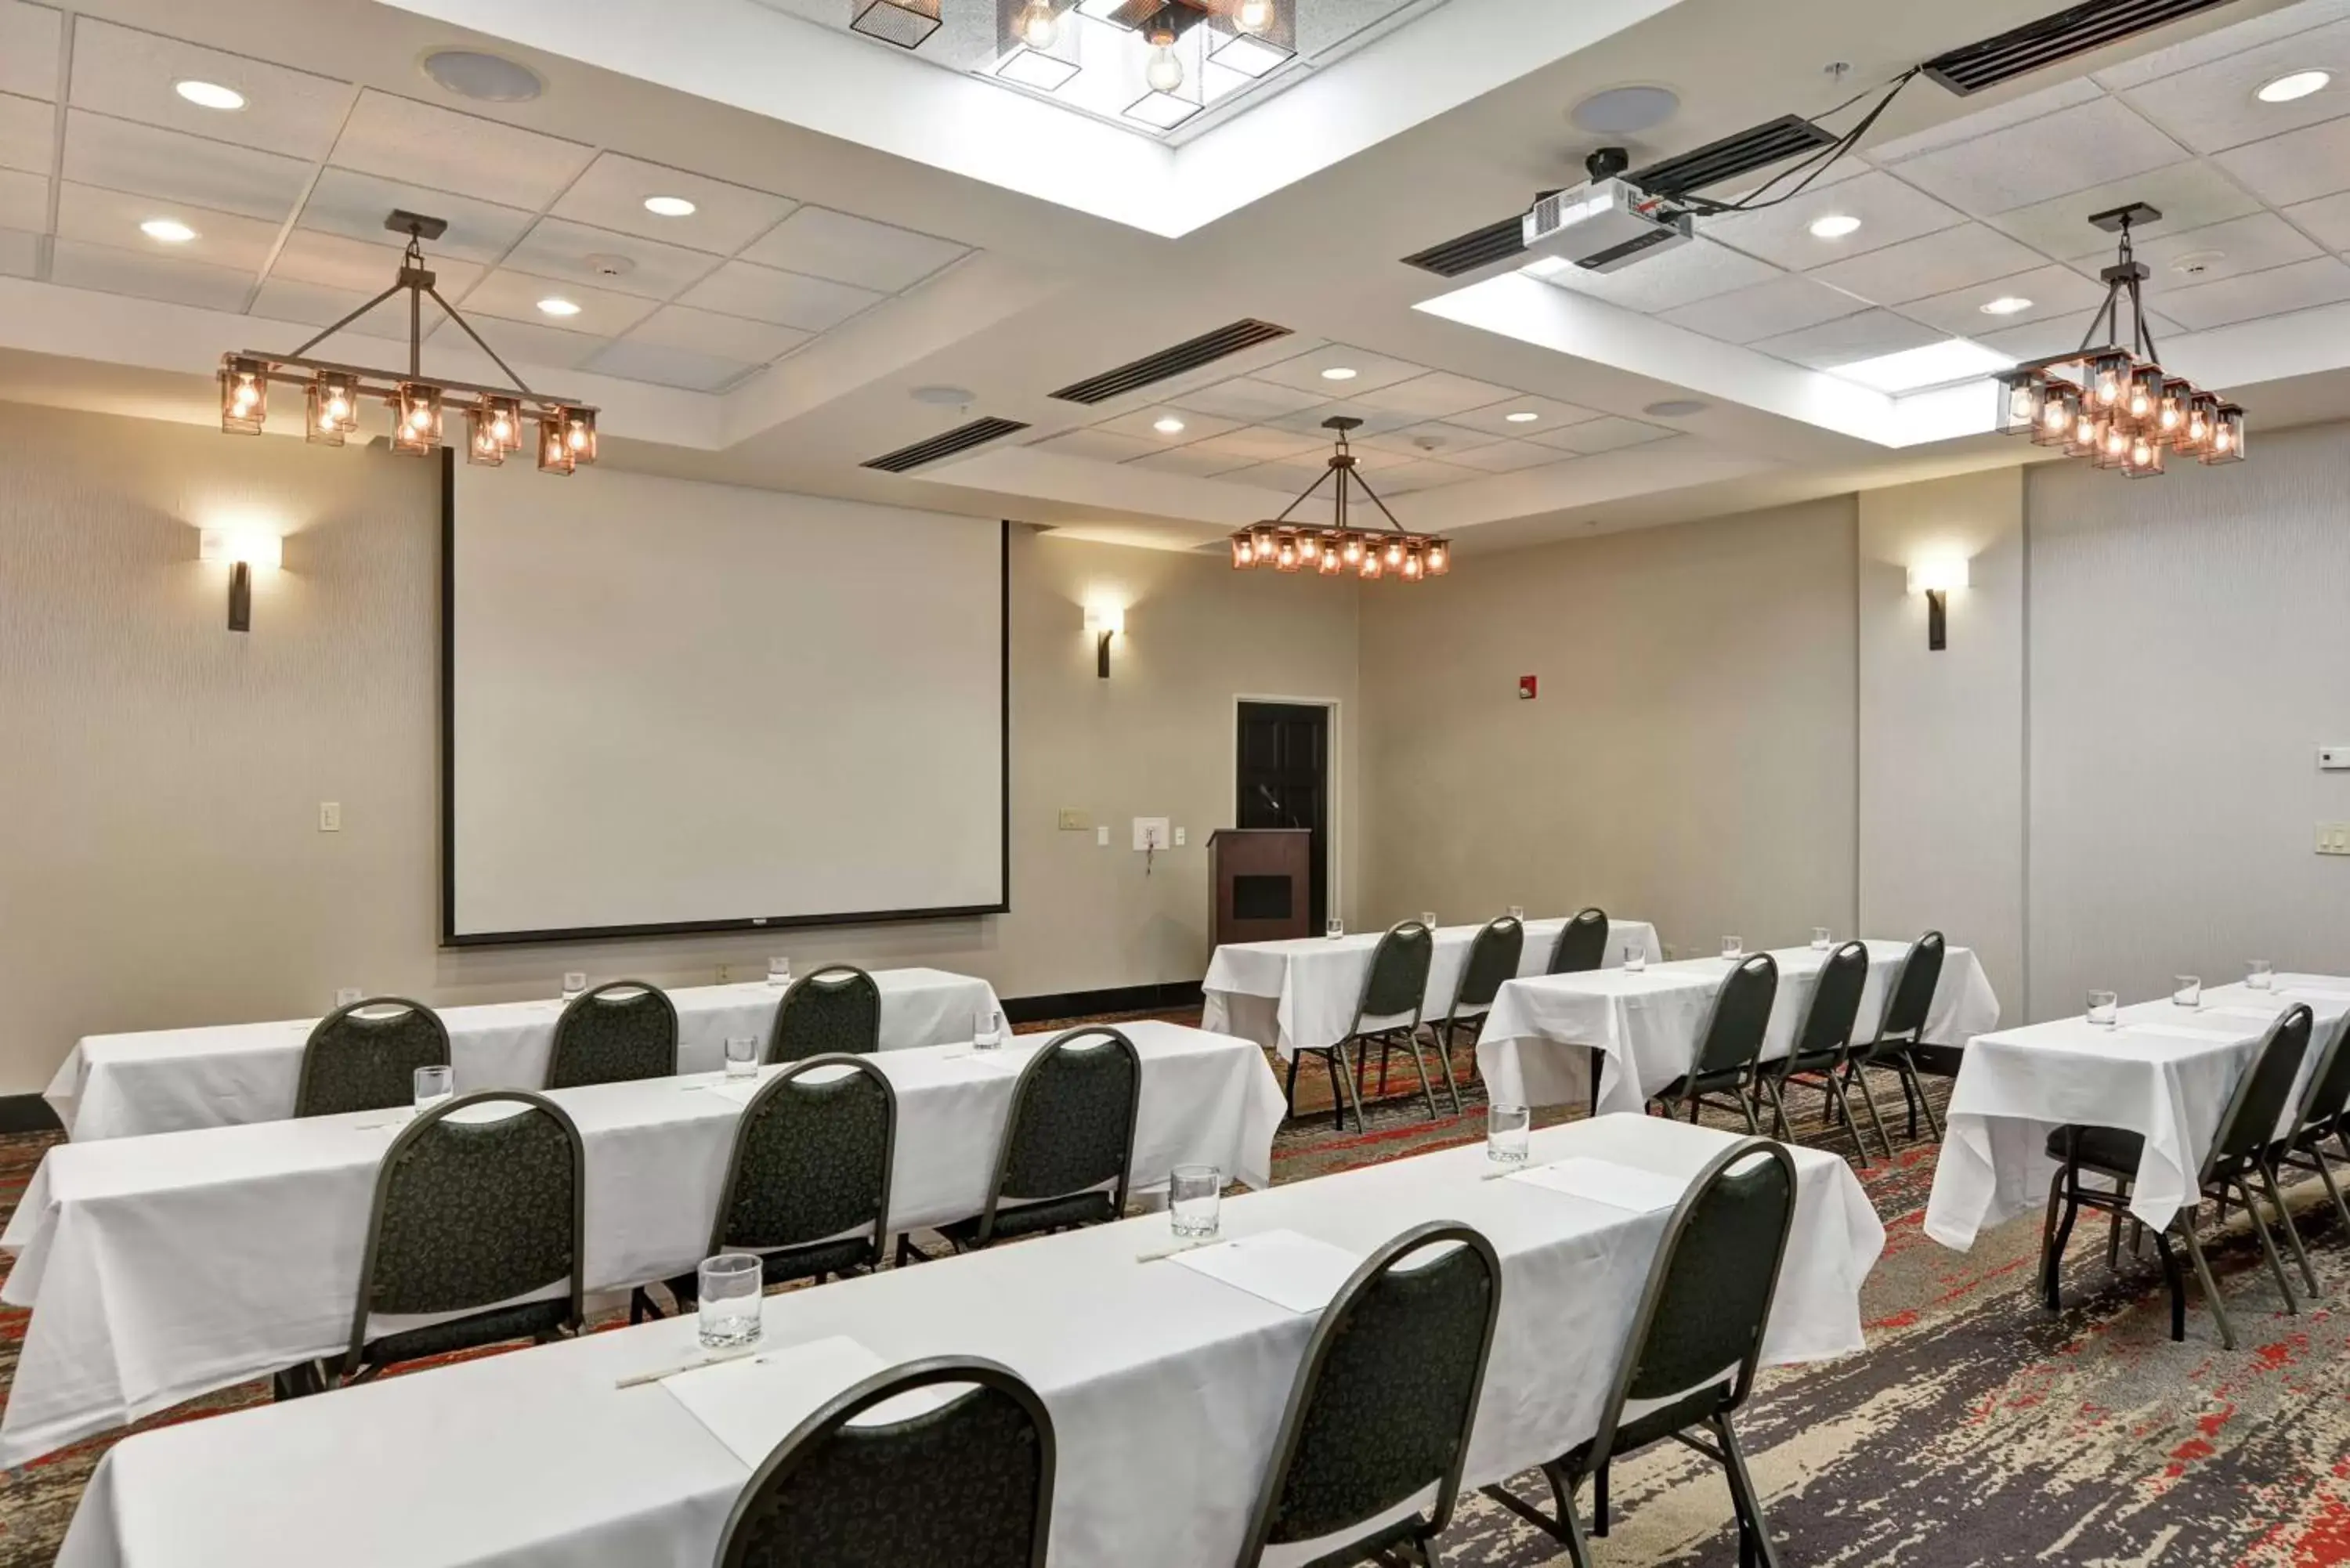 Meeting/conference room in DoubleTree by Hilton Hattiesburg, MS